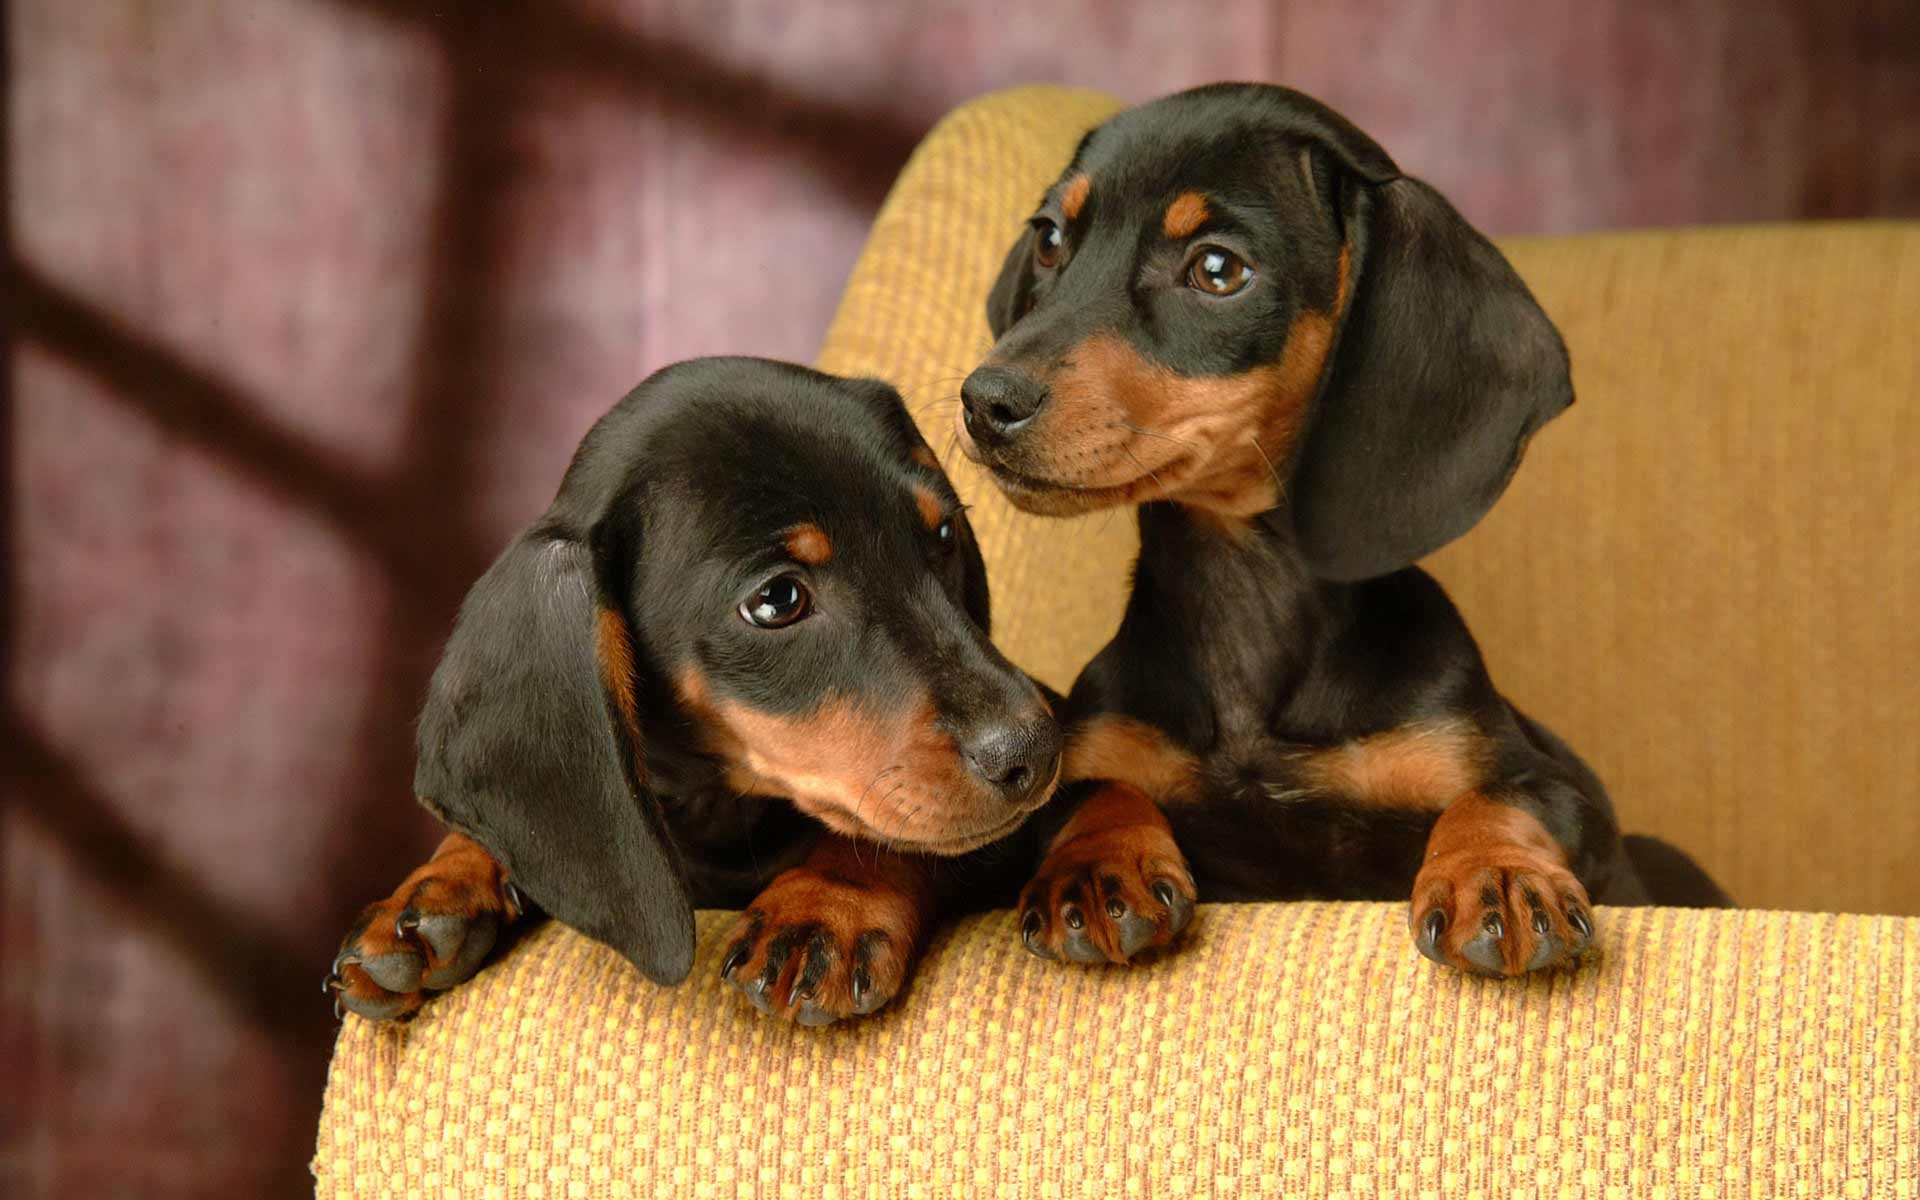 This 🐕 Dog Breeds Quiz May Be a Liiiittle Challenging, But Let’s See If You Can Score 15/20 Dachshunds1